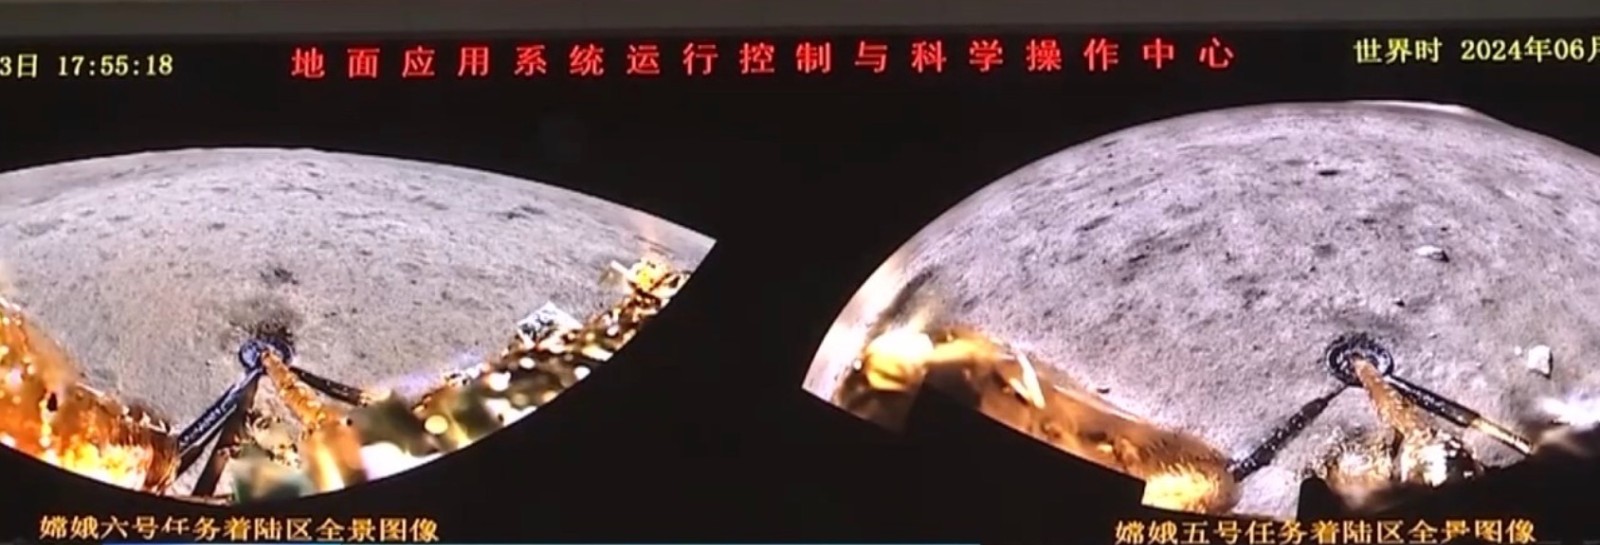 An image of the surface of the far side of the moon captured by the panoramic camera on the lander of China's Chang'e-6 probe (L), and an image of the surface of the far side of the moon captured by the panoramic camera on the lander of China's Chang'e-5 probe (R). /CNSA